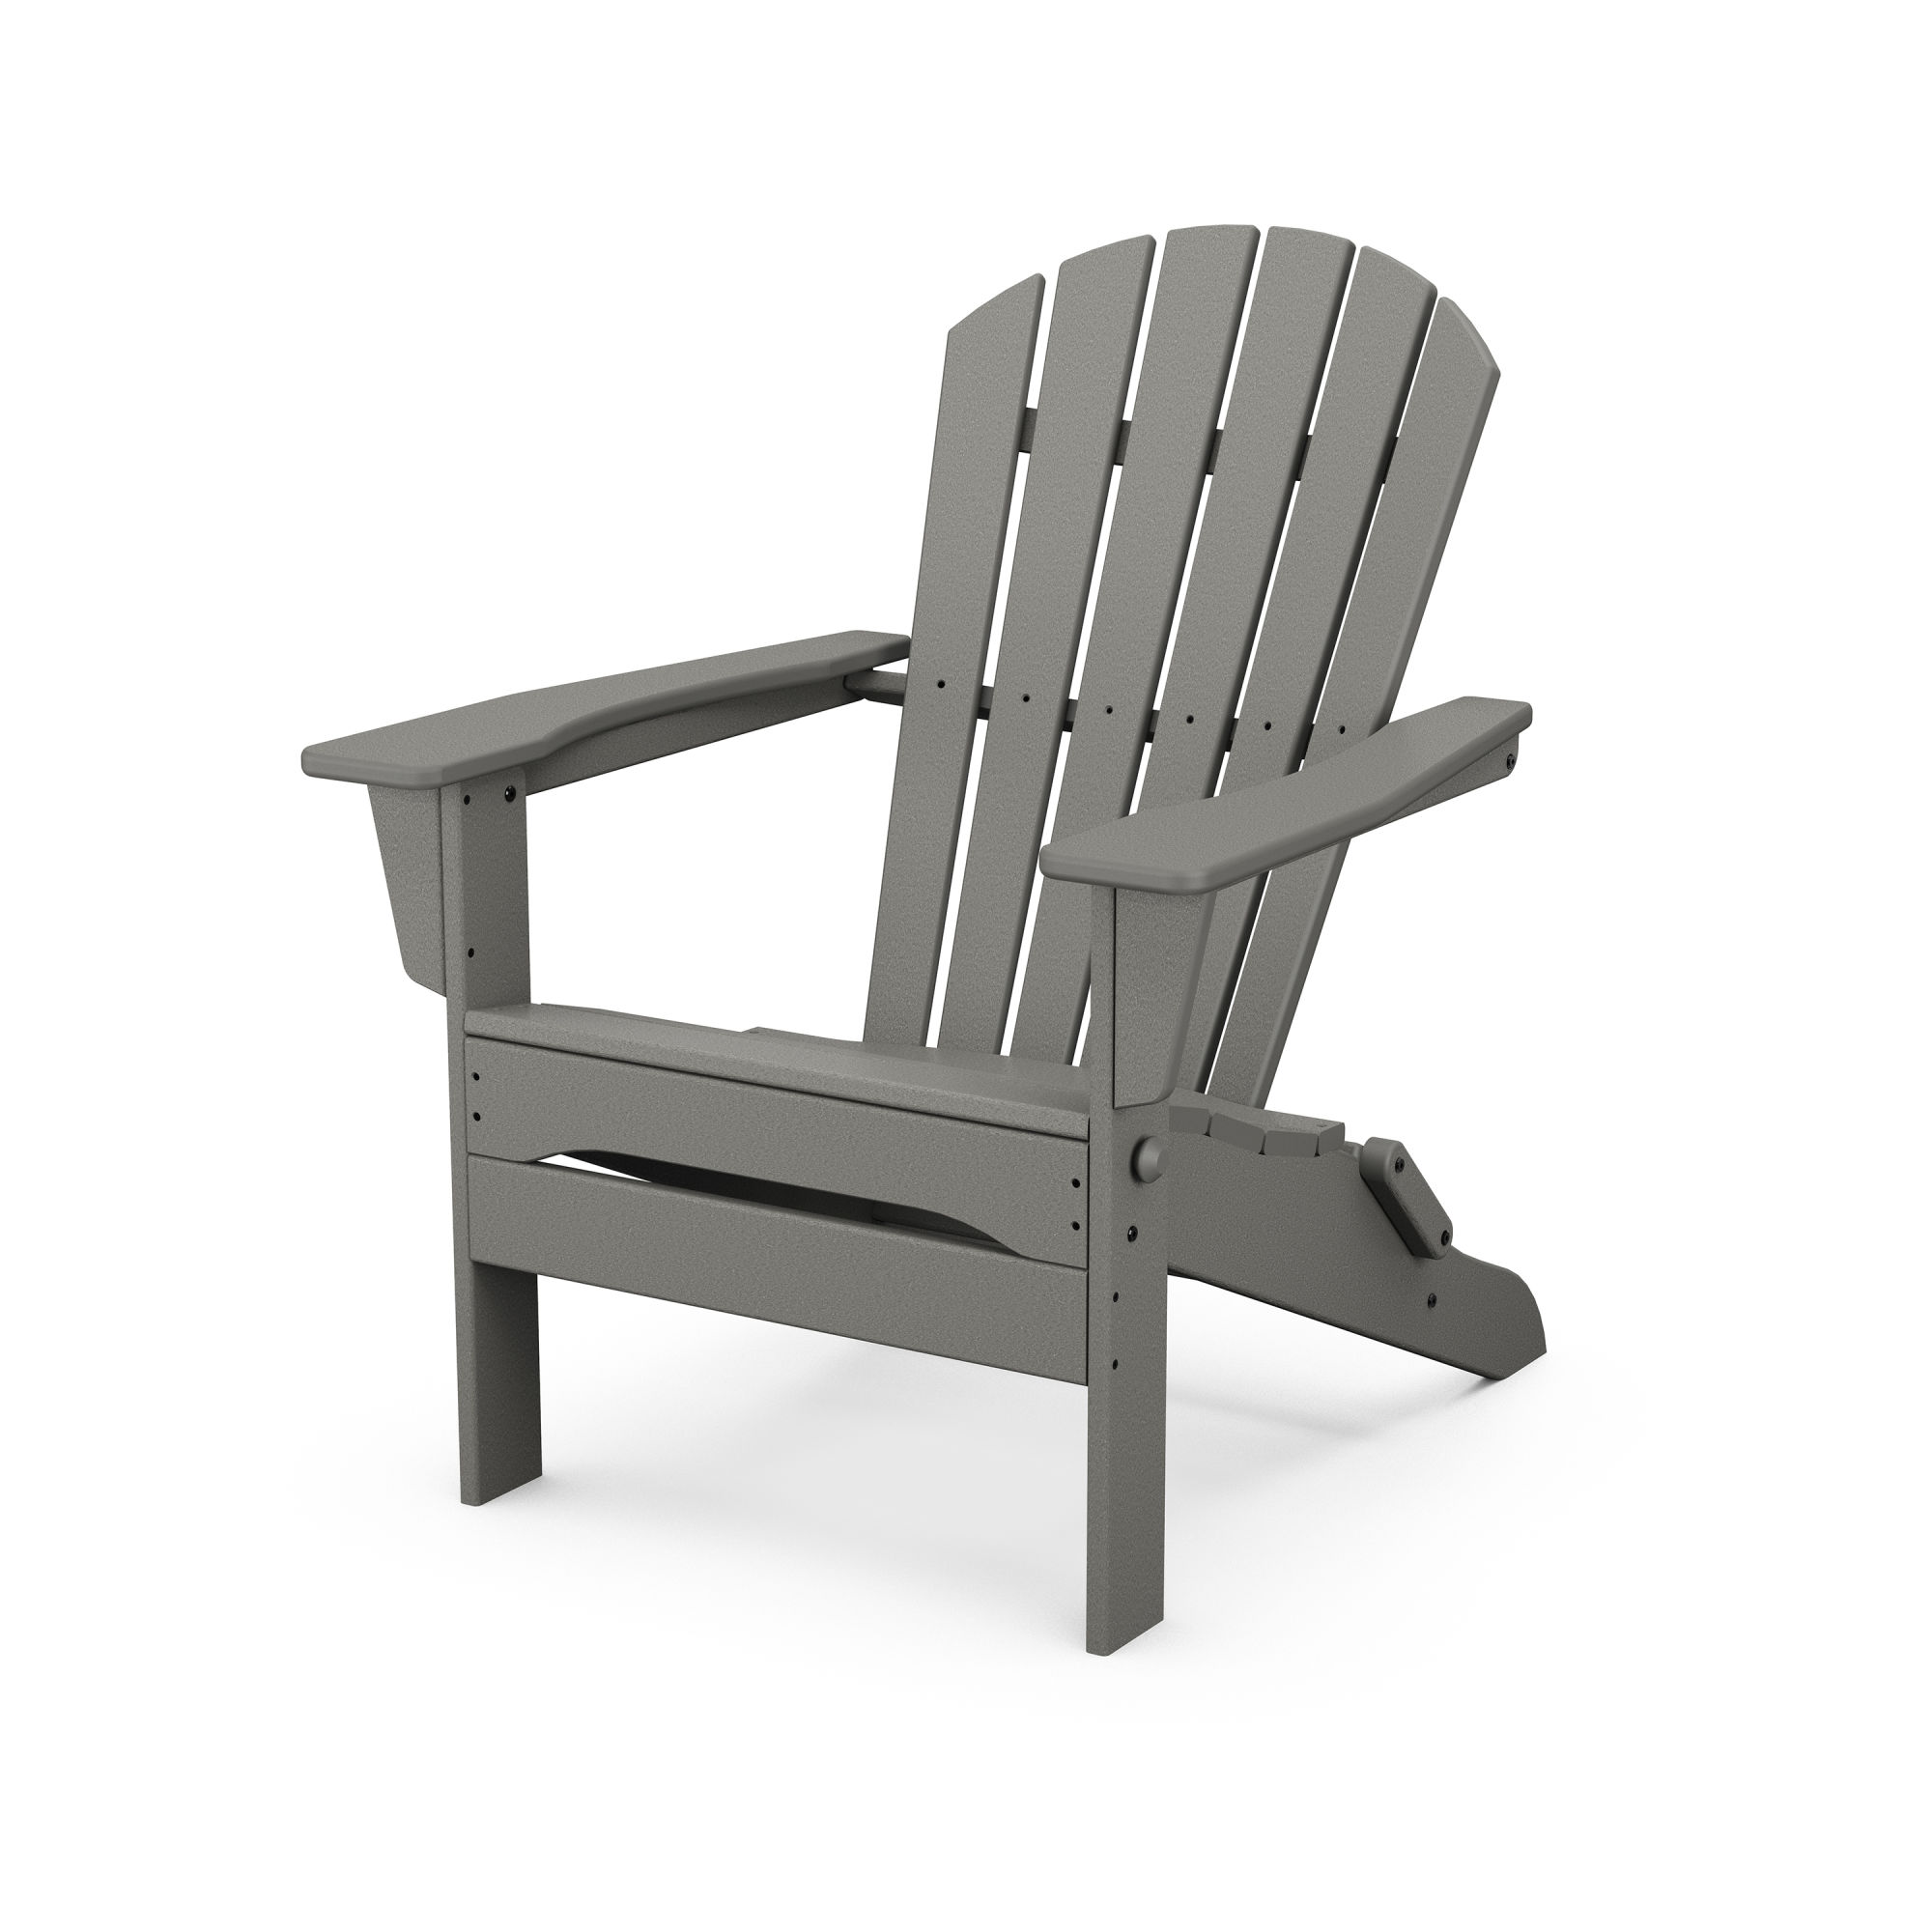 Minimalist Polywood South Beach Folding Adirondack Chair for Small Space